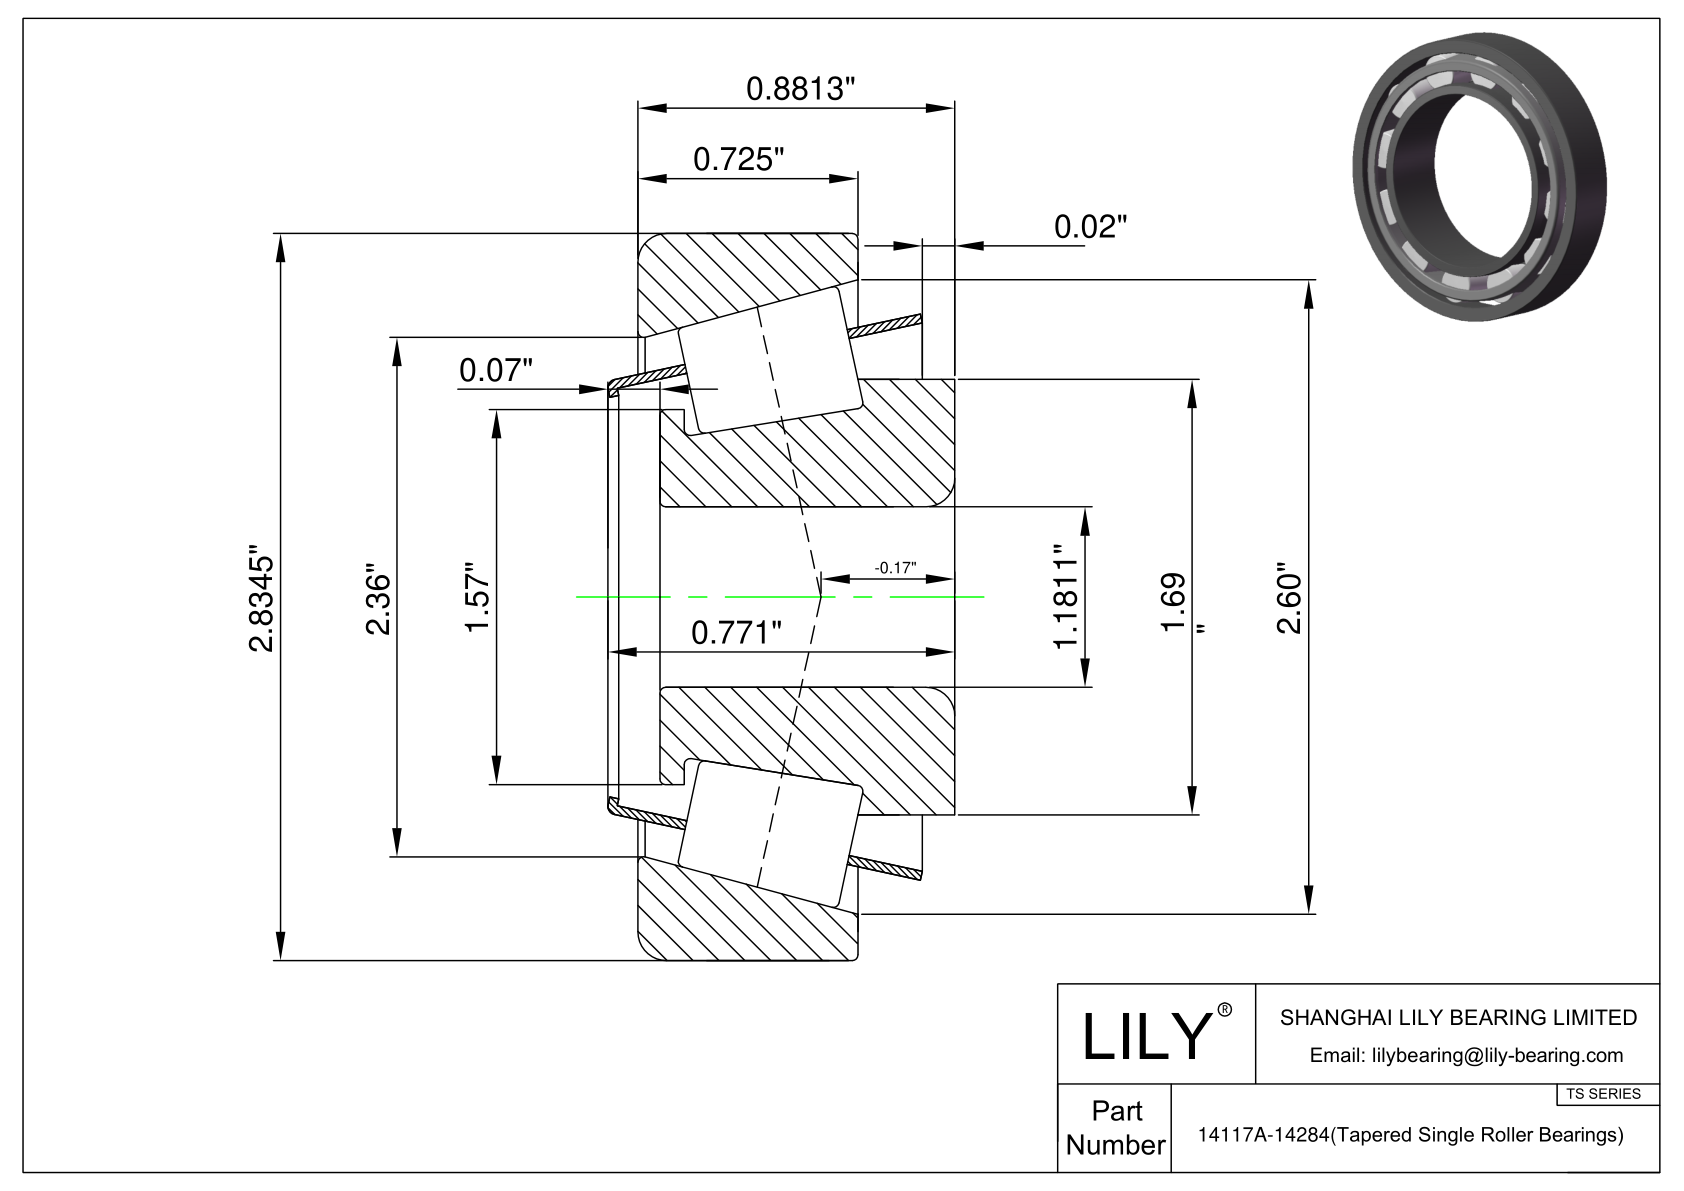 14117A-14284 TS (Tapered Single Roller Bearings) (Imperial) cad drawing